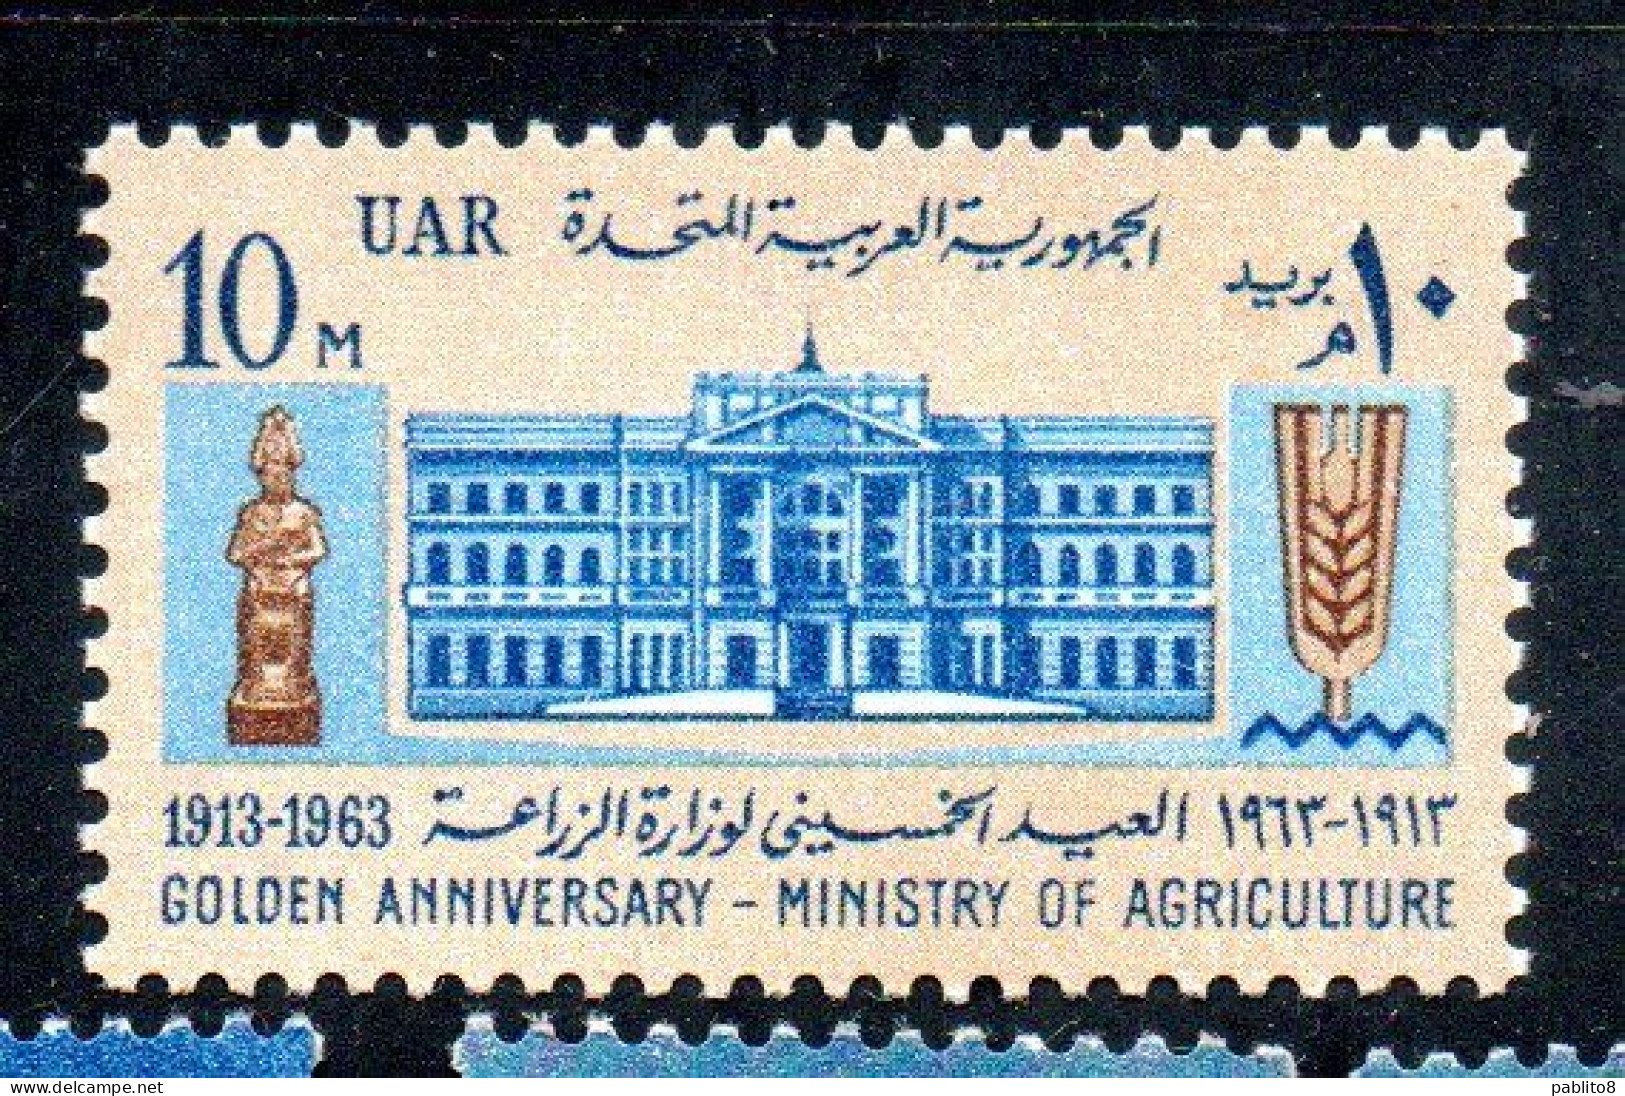 UAR EGYPT EGITTO 1963 50th ANNIVERSARY OF MINISTRY OF AGRICULTURAL 10m MNH - Unused Stamps